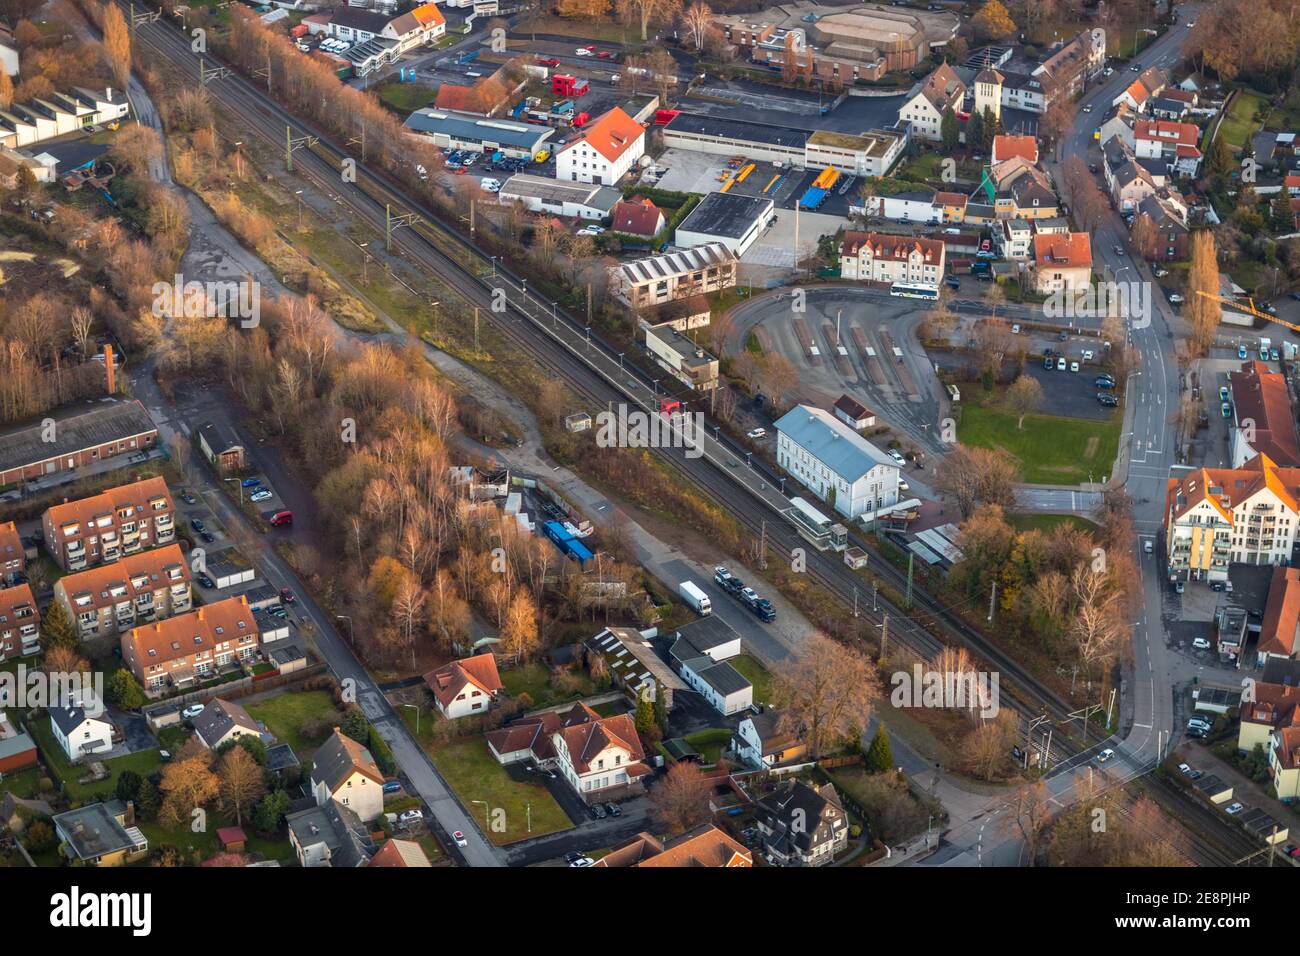 Aerial view, Werl train station, Grafenstraße bus station, culture and event centre, Werl, North Rhine-Westphalia, Germany, train station, Bahnhofstra Stock Photo